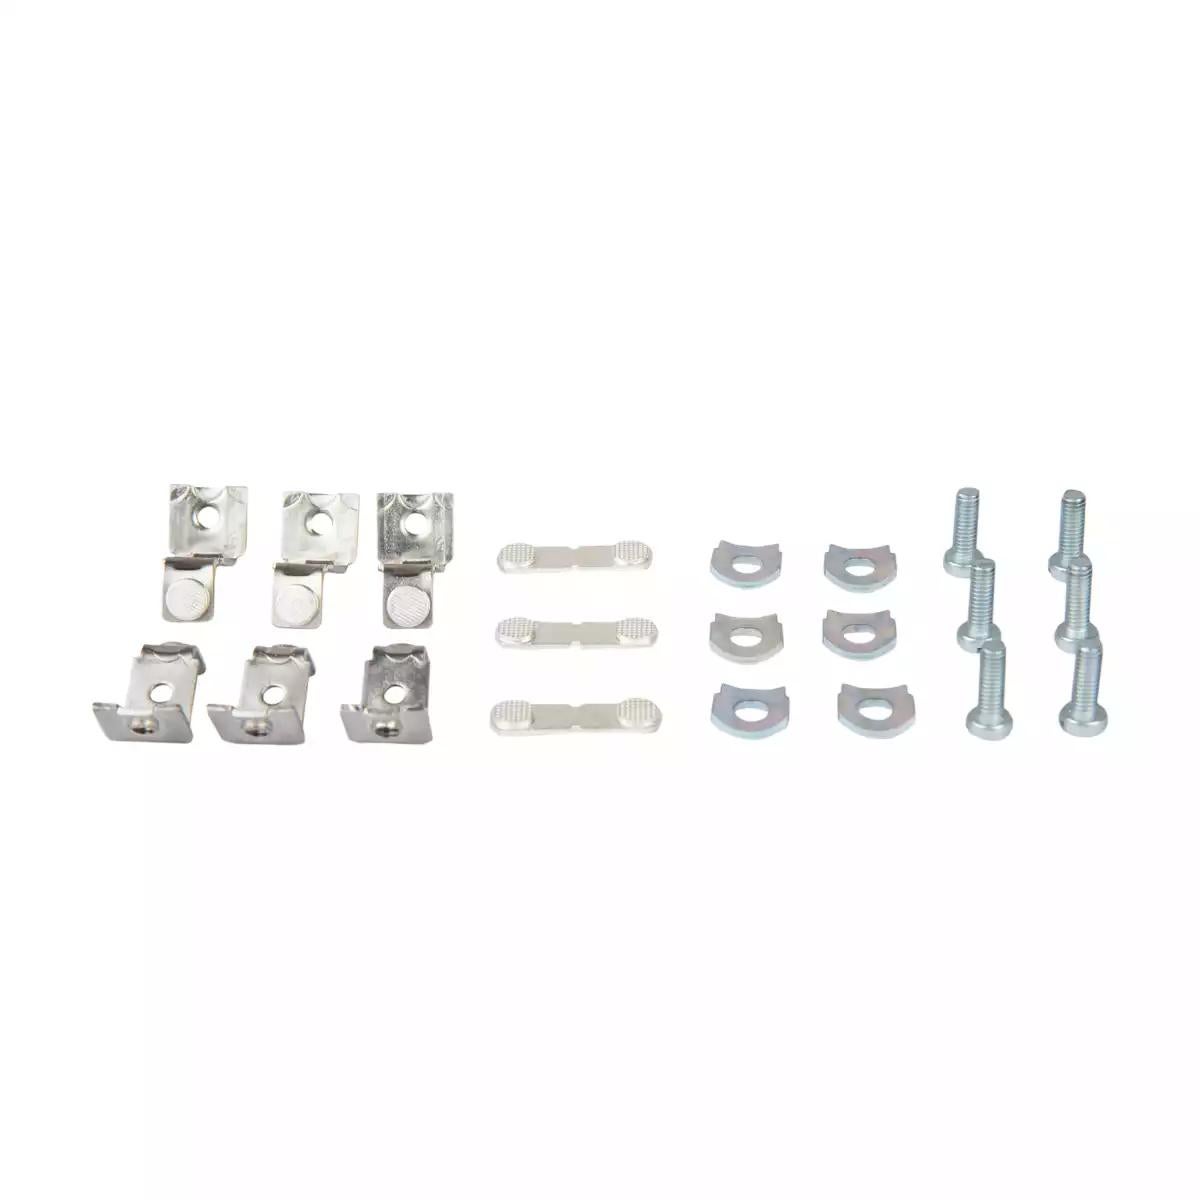 MNX 18 - Spare Contact Kit